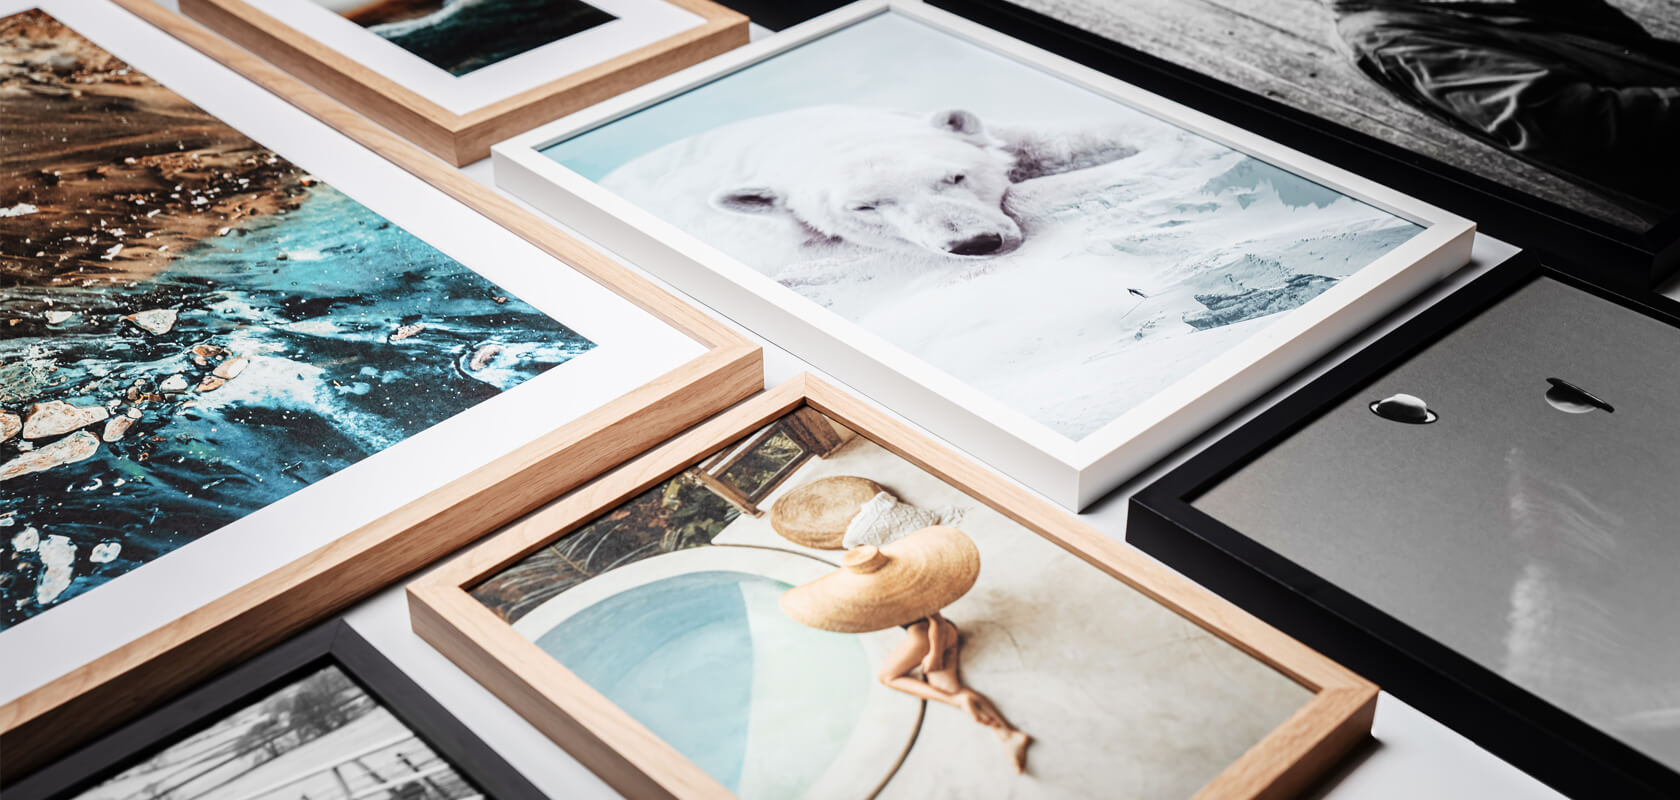 High-quality photo prints on archival, acid-free papers.